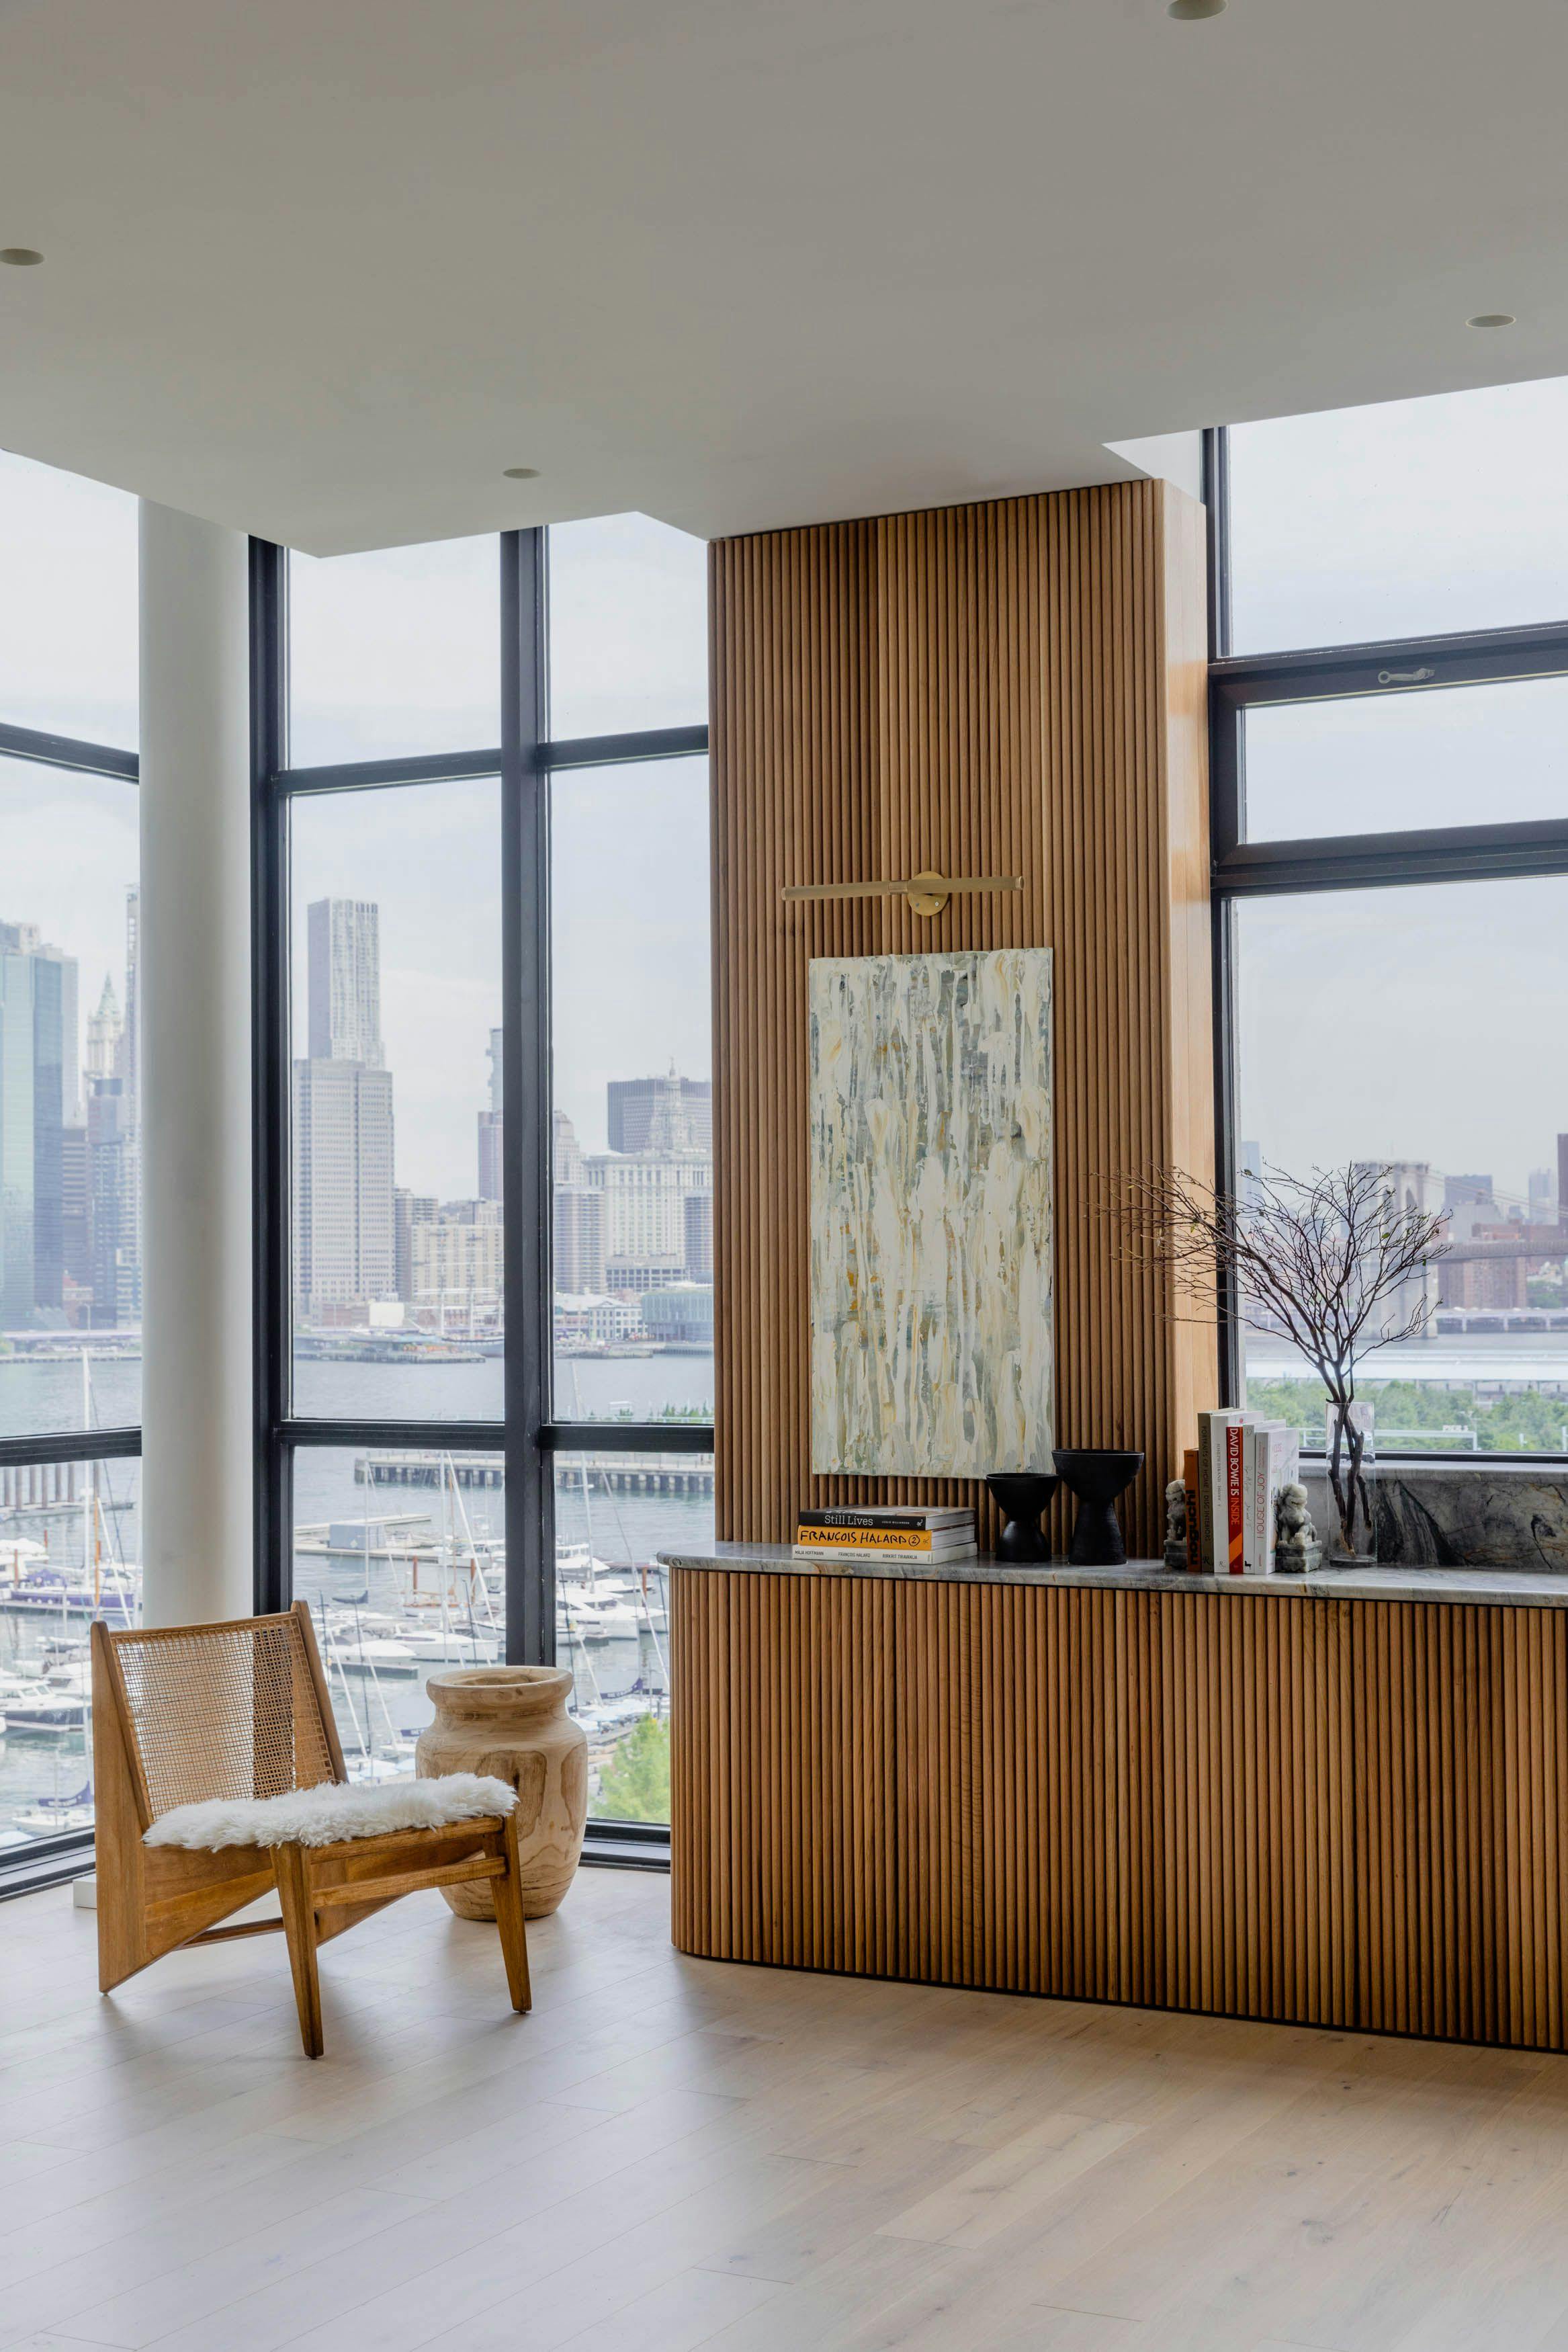 A modern living room with a city view, featuring minimalist design elements and a monolithic kitchen island overlooking the Brooklyn Bridge.